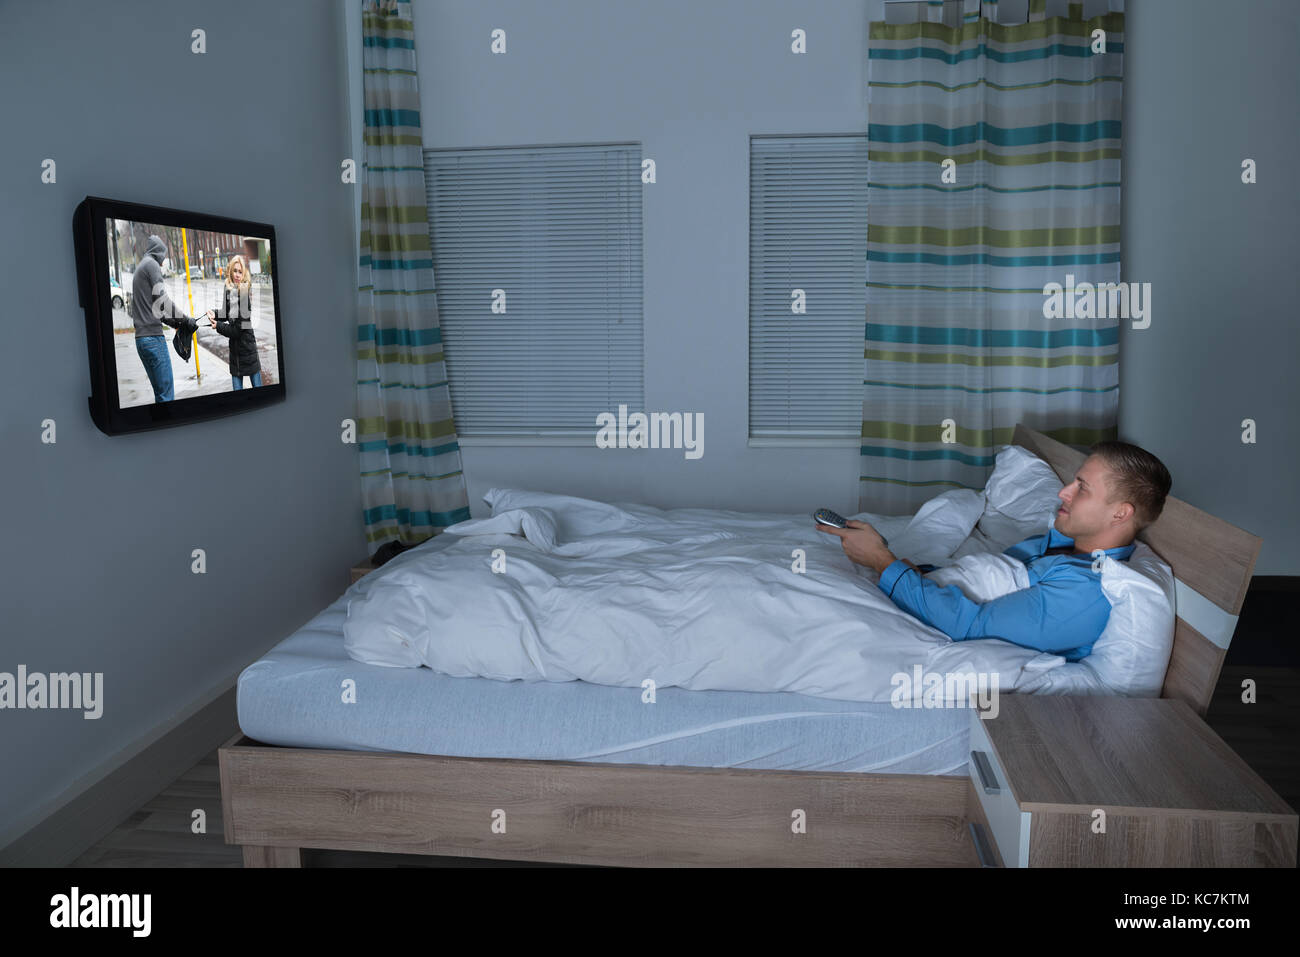 Photo Of Man Lying On Bed Watching Television Stock Photo